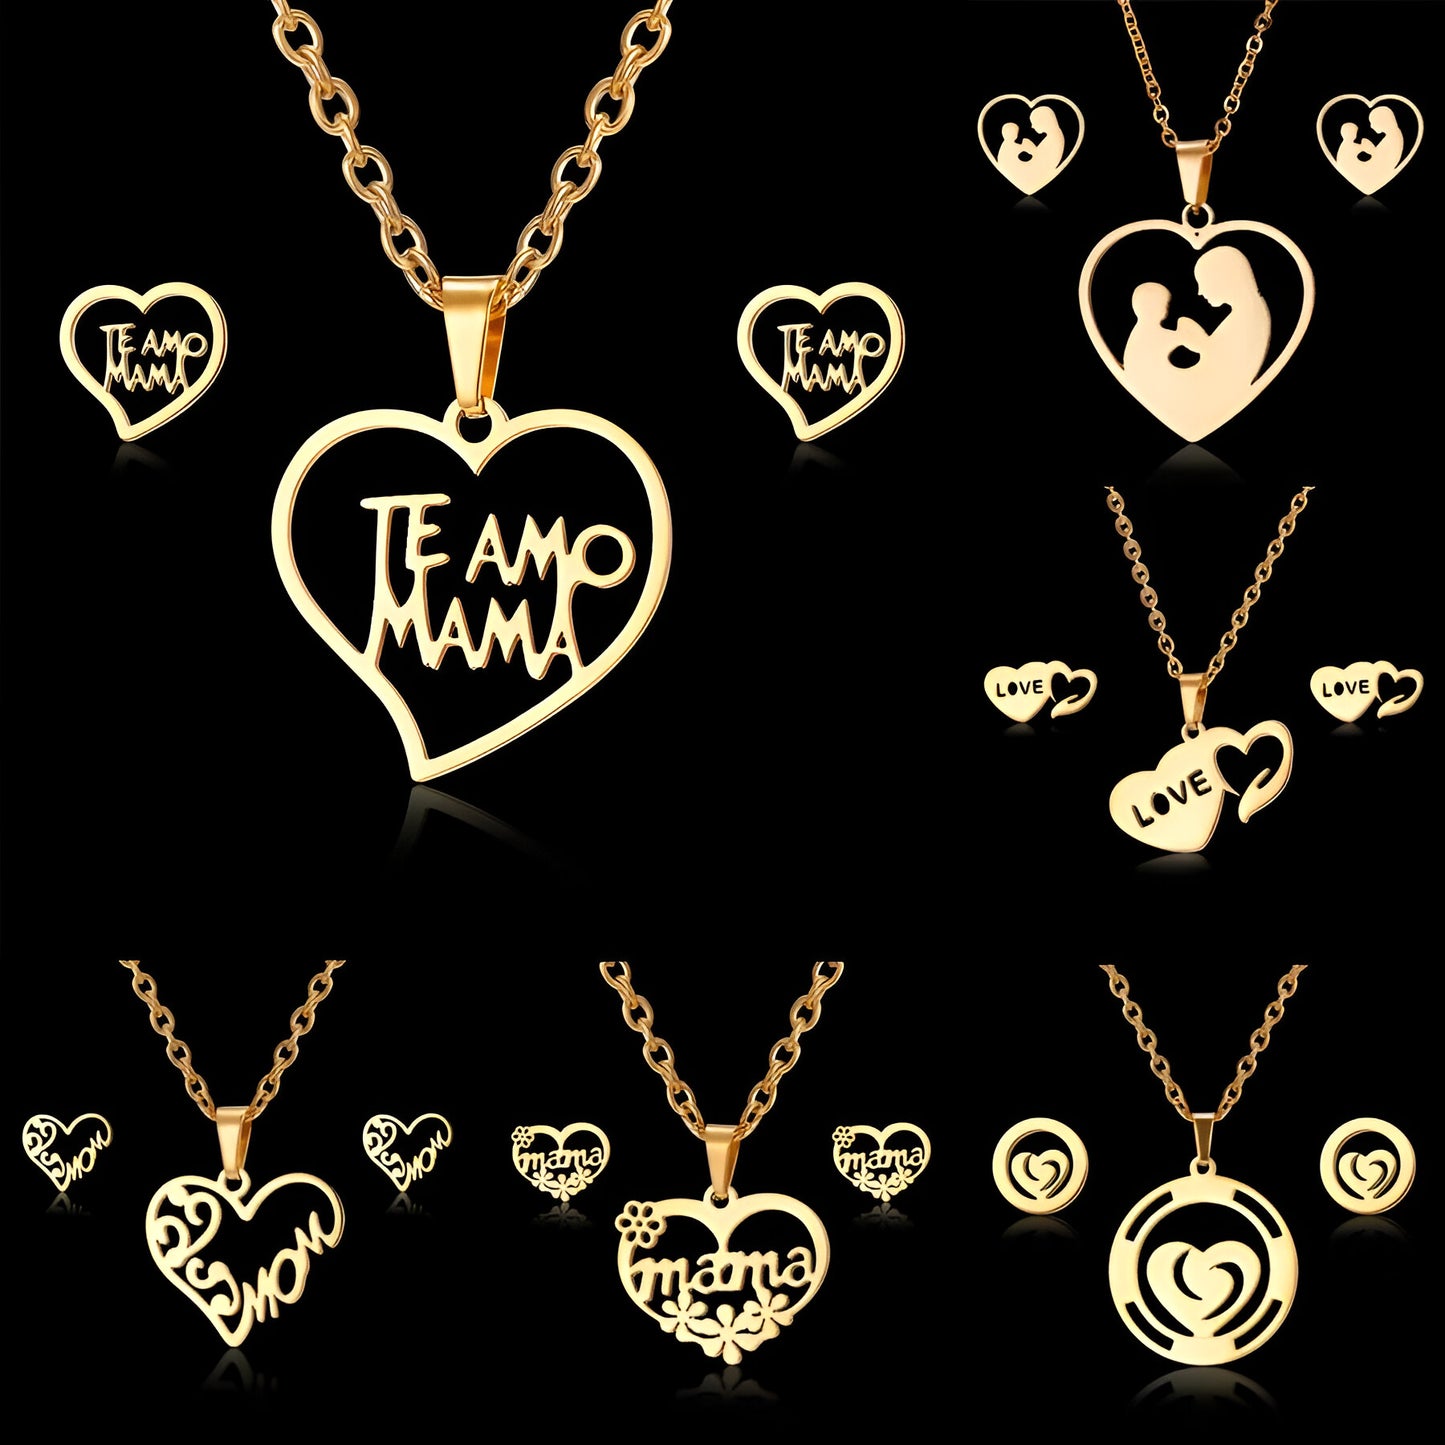 Mom's Eternal Love Radiant Jewelry Set with Necklace and Earrings